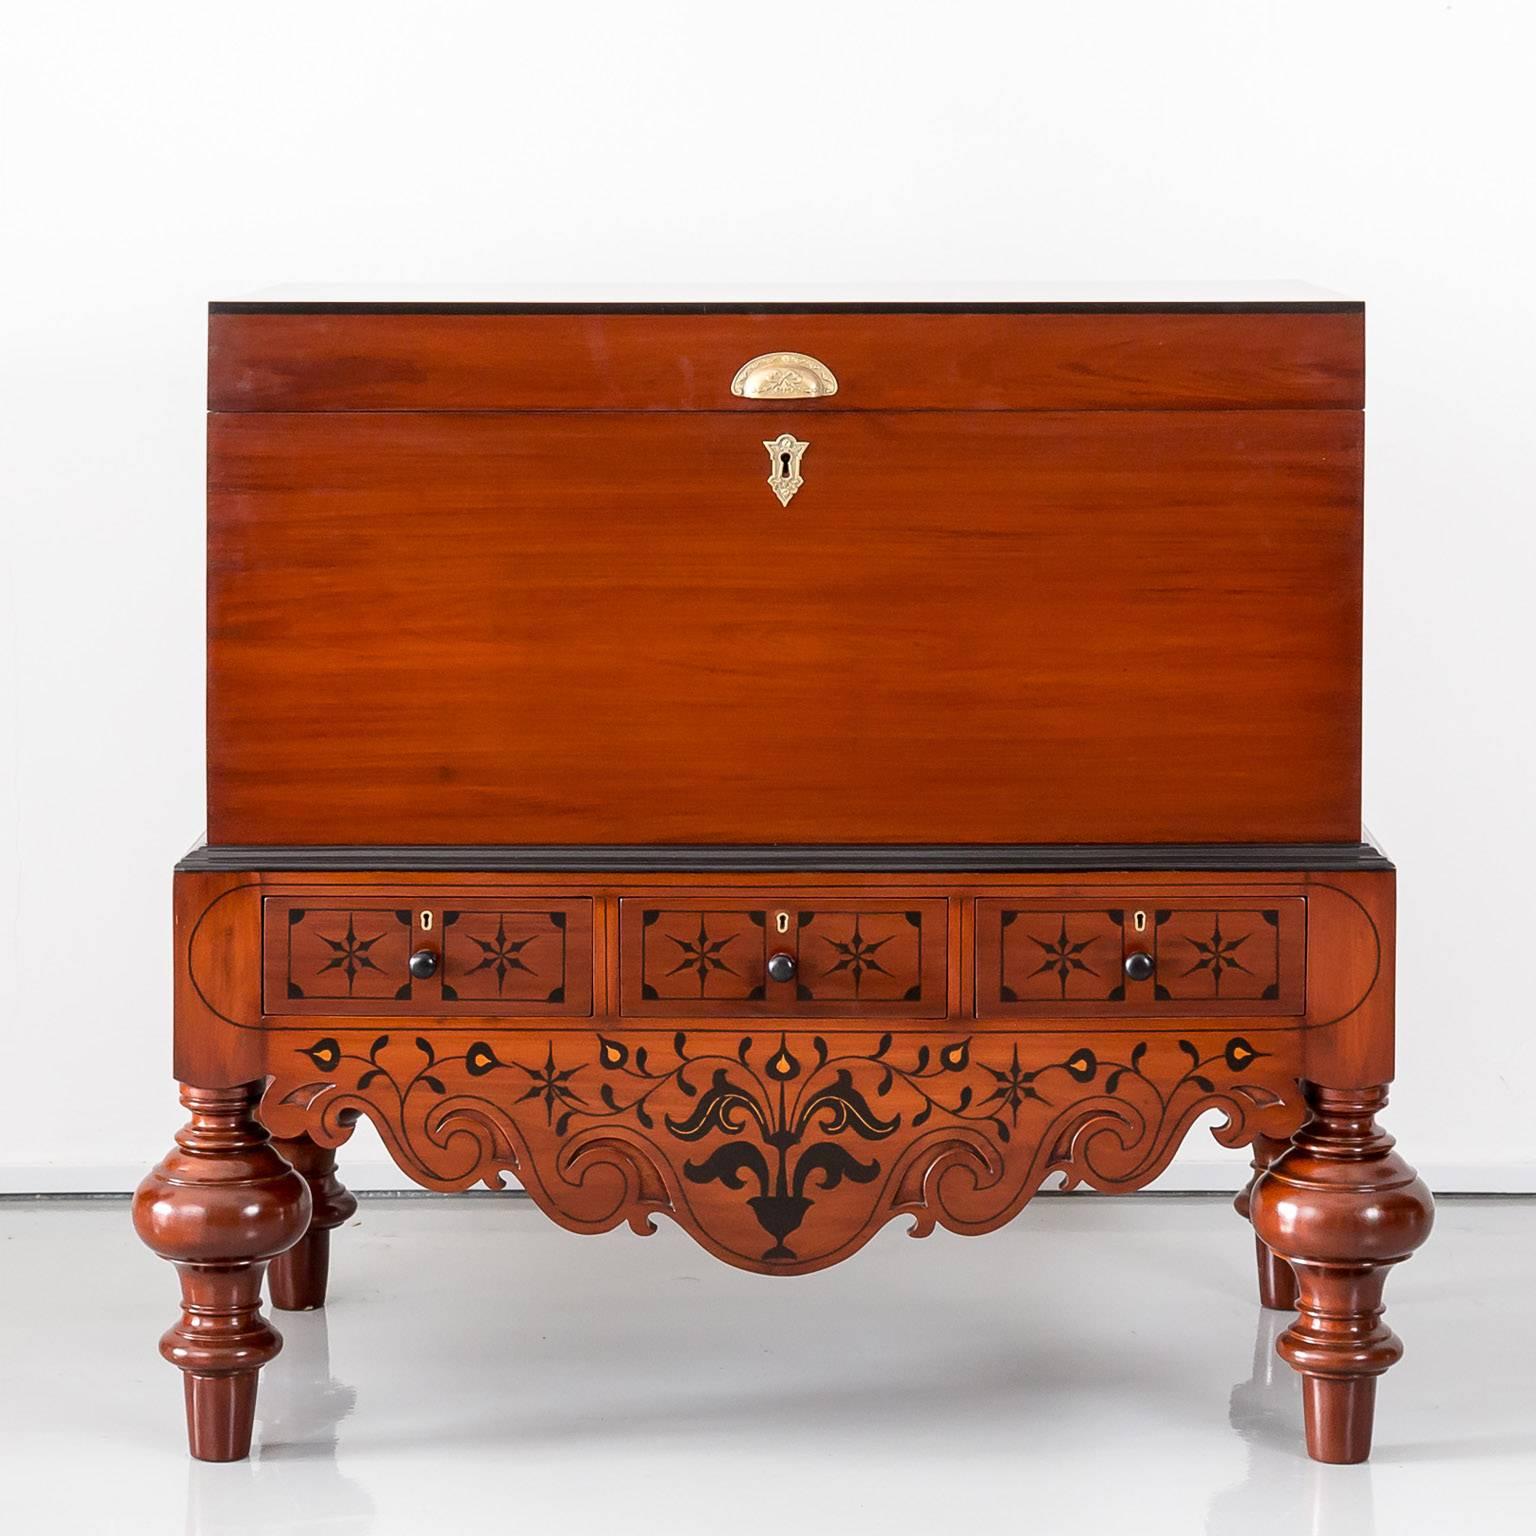 A typical Dutch colonial mahogany chest on stand of solid plank construction with a hinged cover. The hinged cover with a molded ebony edge opens to a plain interior with a small document compartment on the left hand side.
The chest rests on a